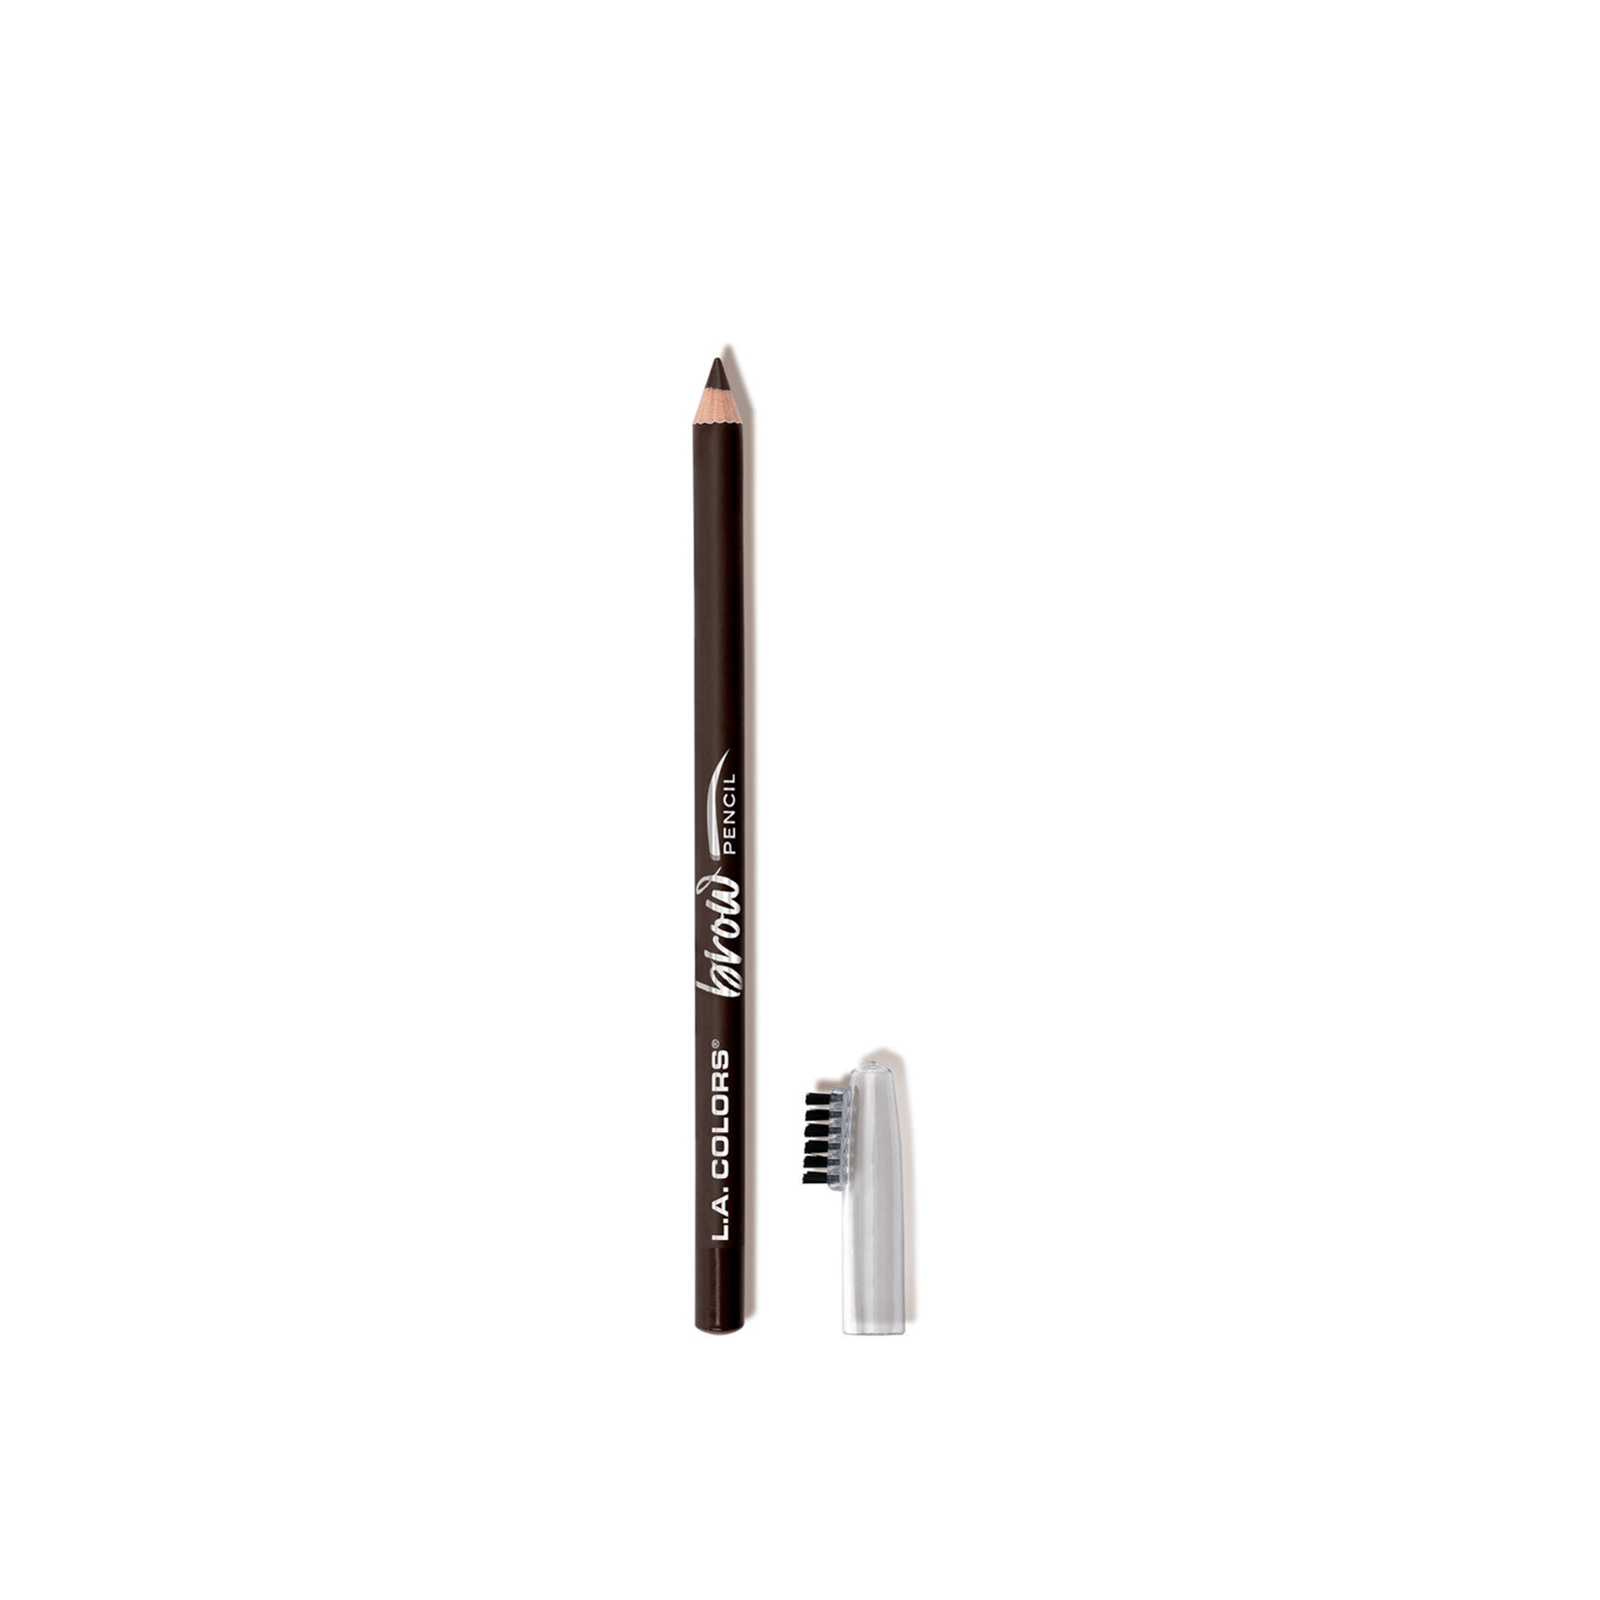 L.A. Colors On Point Brow Pencil CBP396 Dark Brown 1.8g